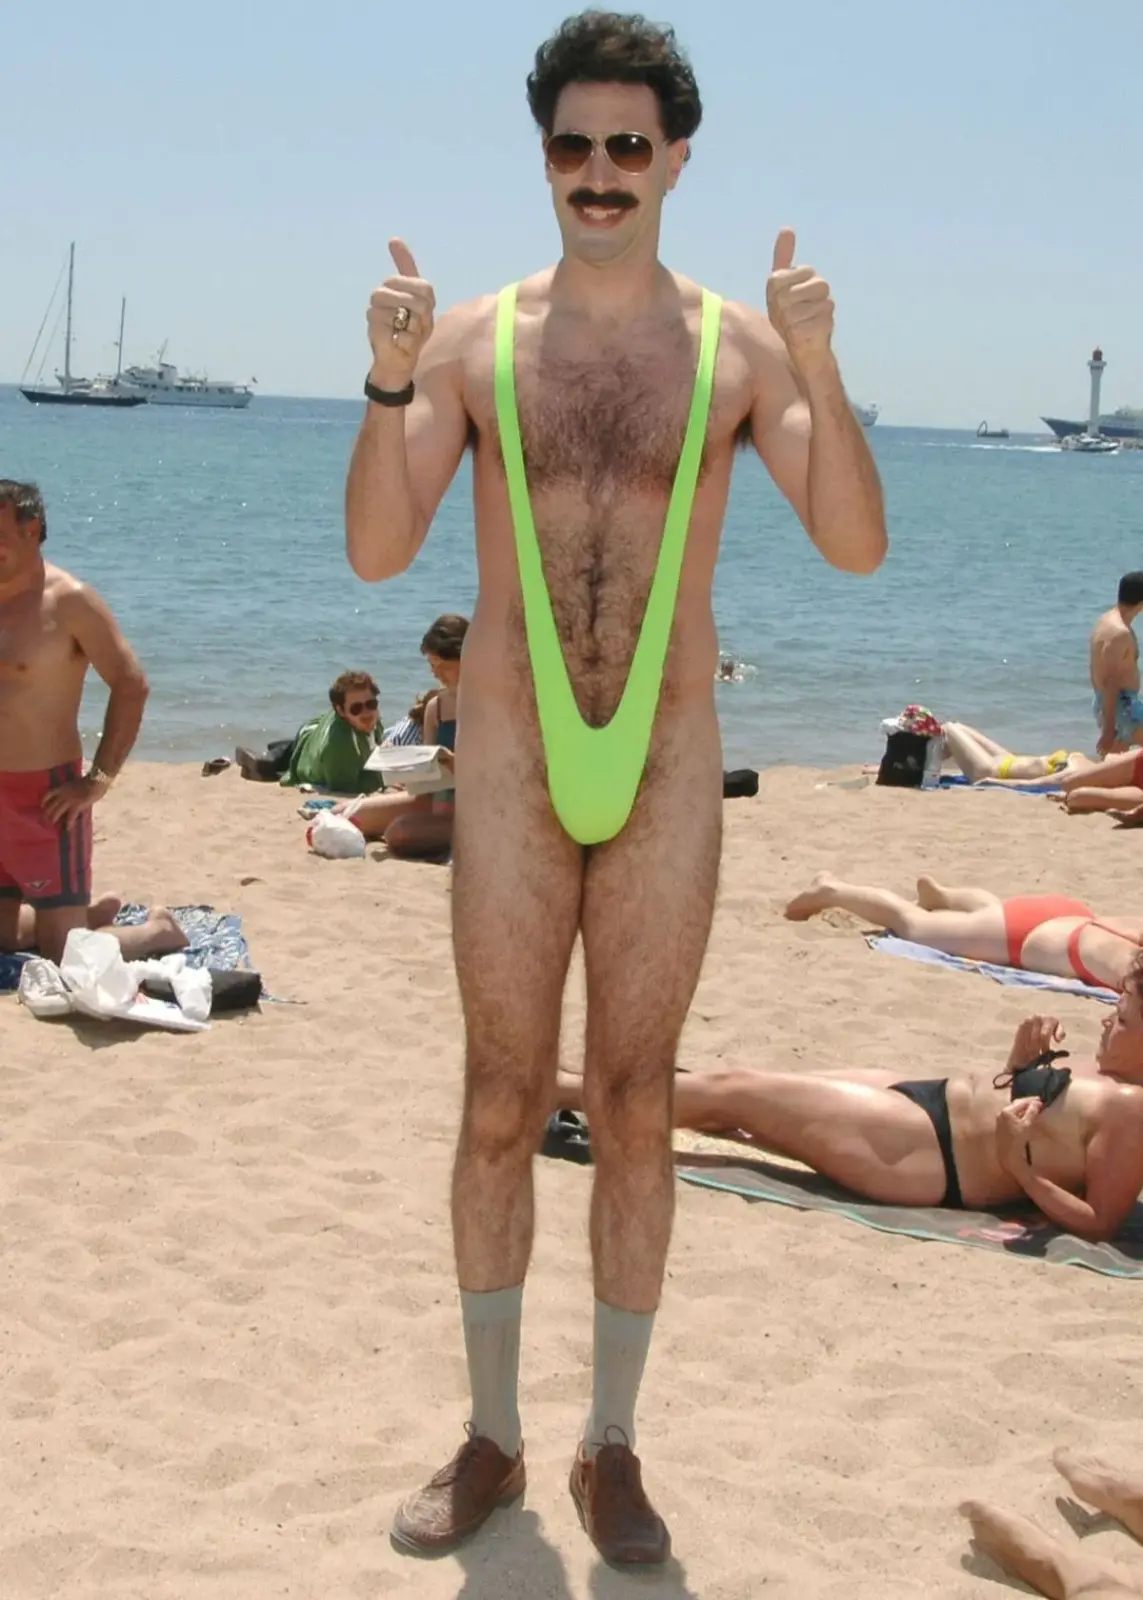 A person wearing a bright green monokini and giving thumbs up